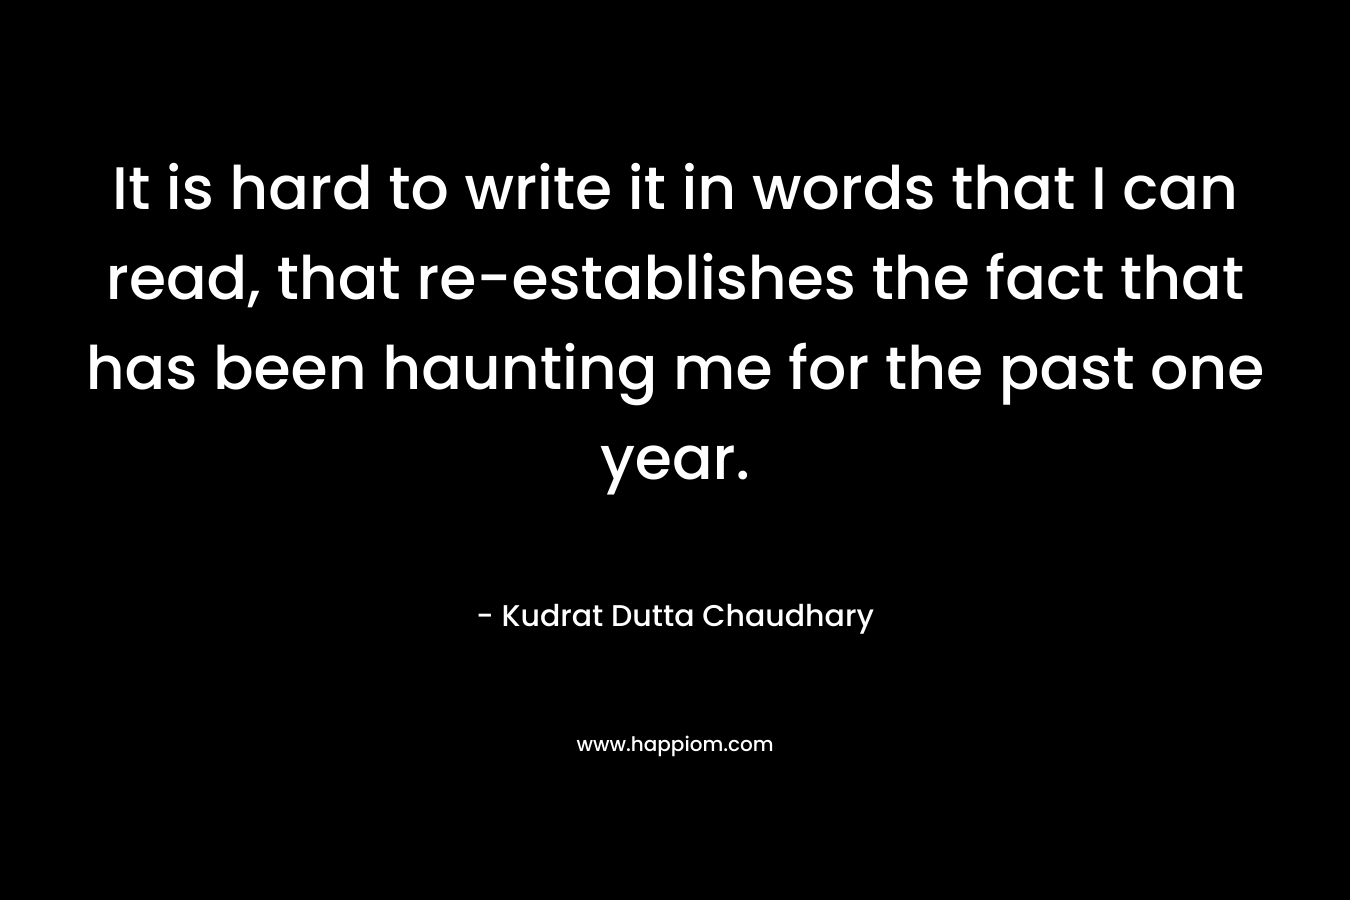 It is hard to write it in words that I can read, that re-establishes the fact that has been haunting me for the past one year. – Kudrat Dutta Chaudhary